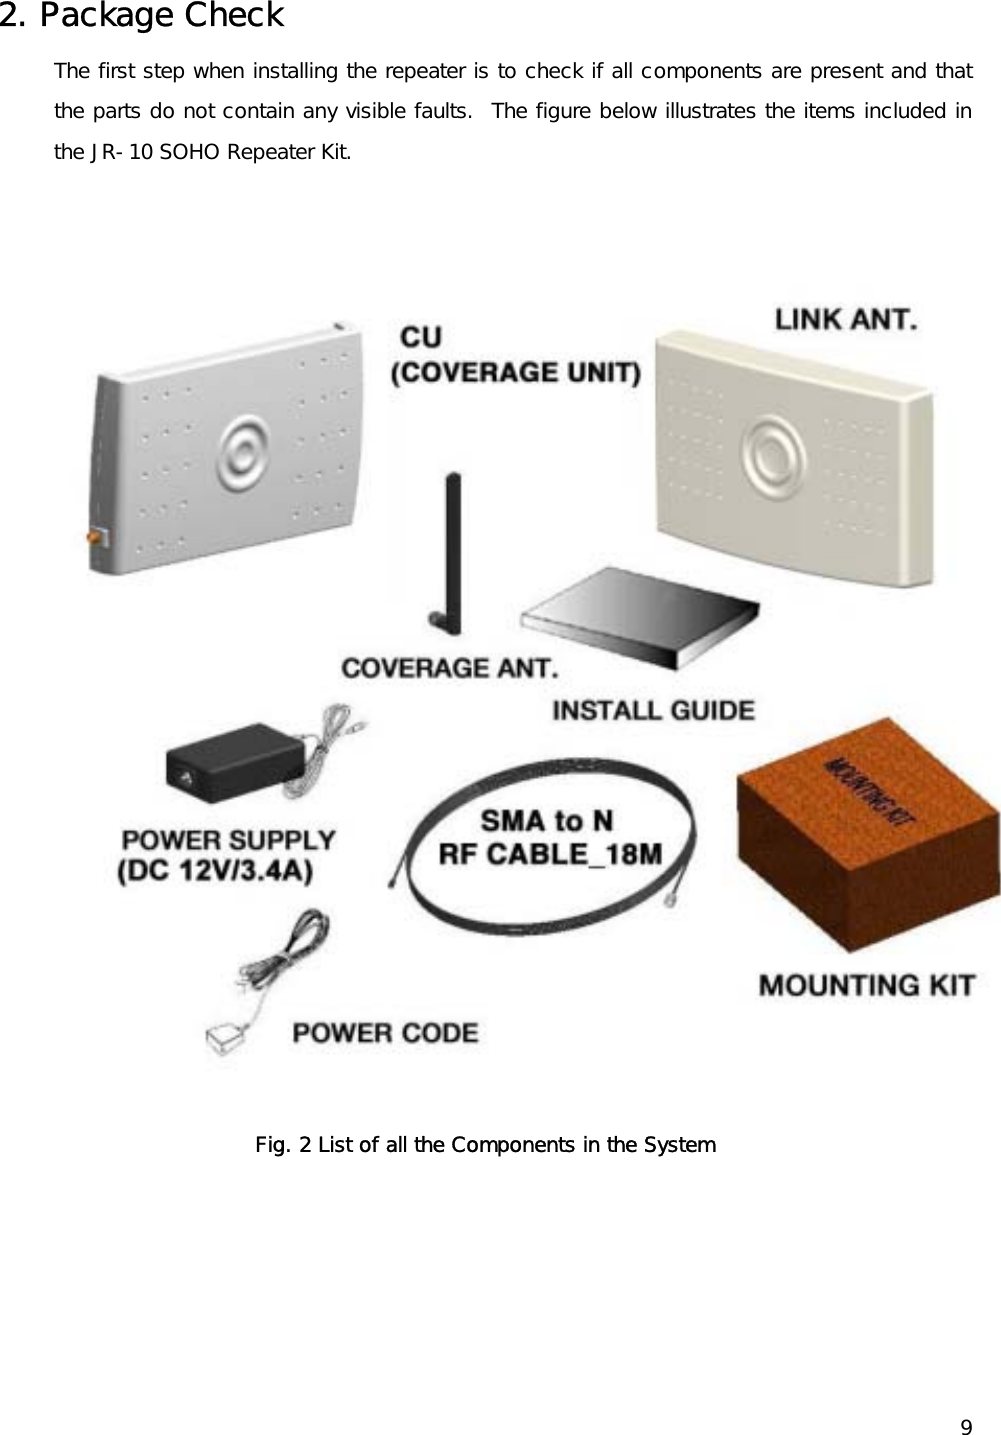   9 2. Package Check  The first step when installing the repeater is to check if all components are present and that the parts do not contain any visible faults.  The figure below illustrates the items included in the JR-10 SOHO Repeater Kit.   Fig. 2 List of all the Components in the System 